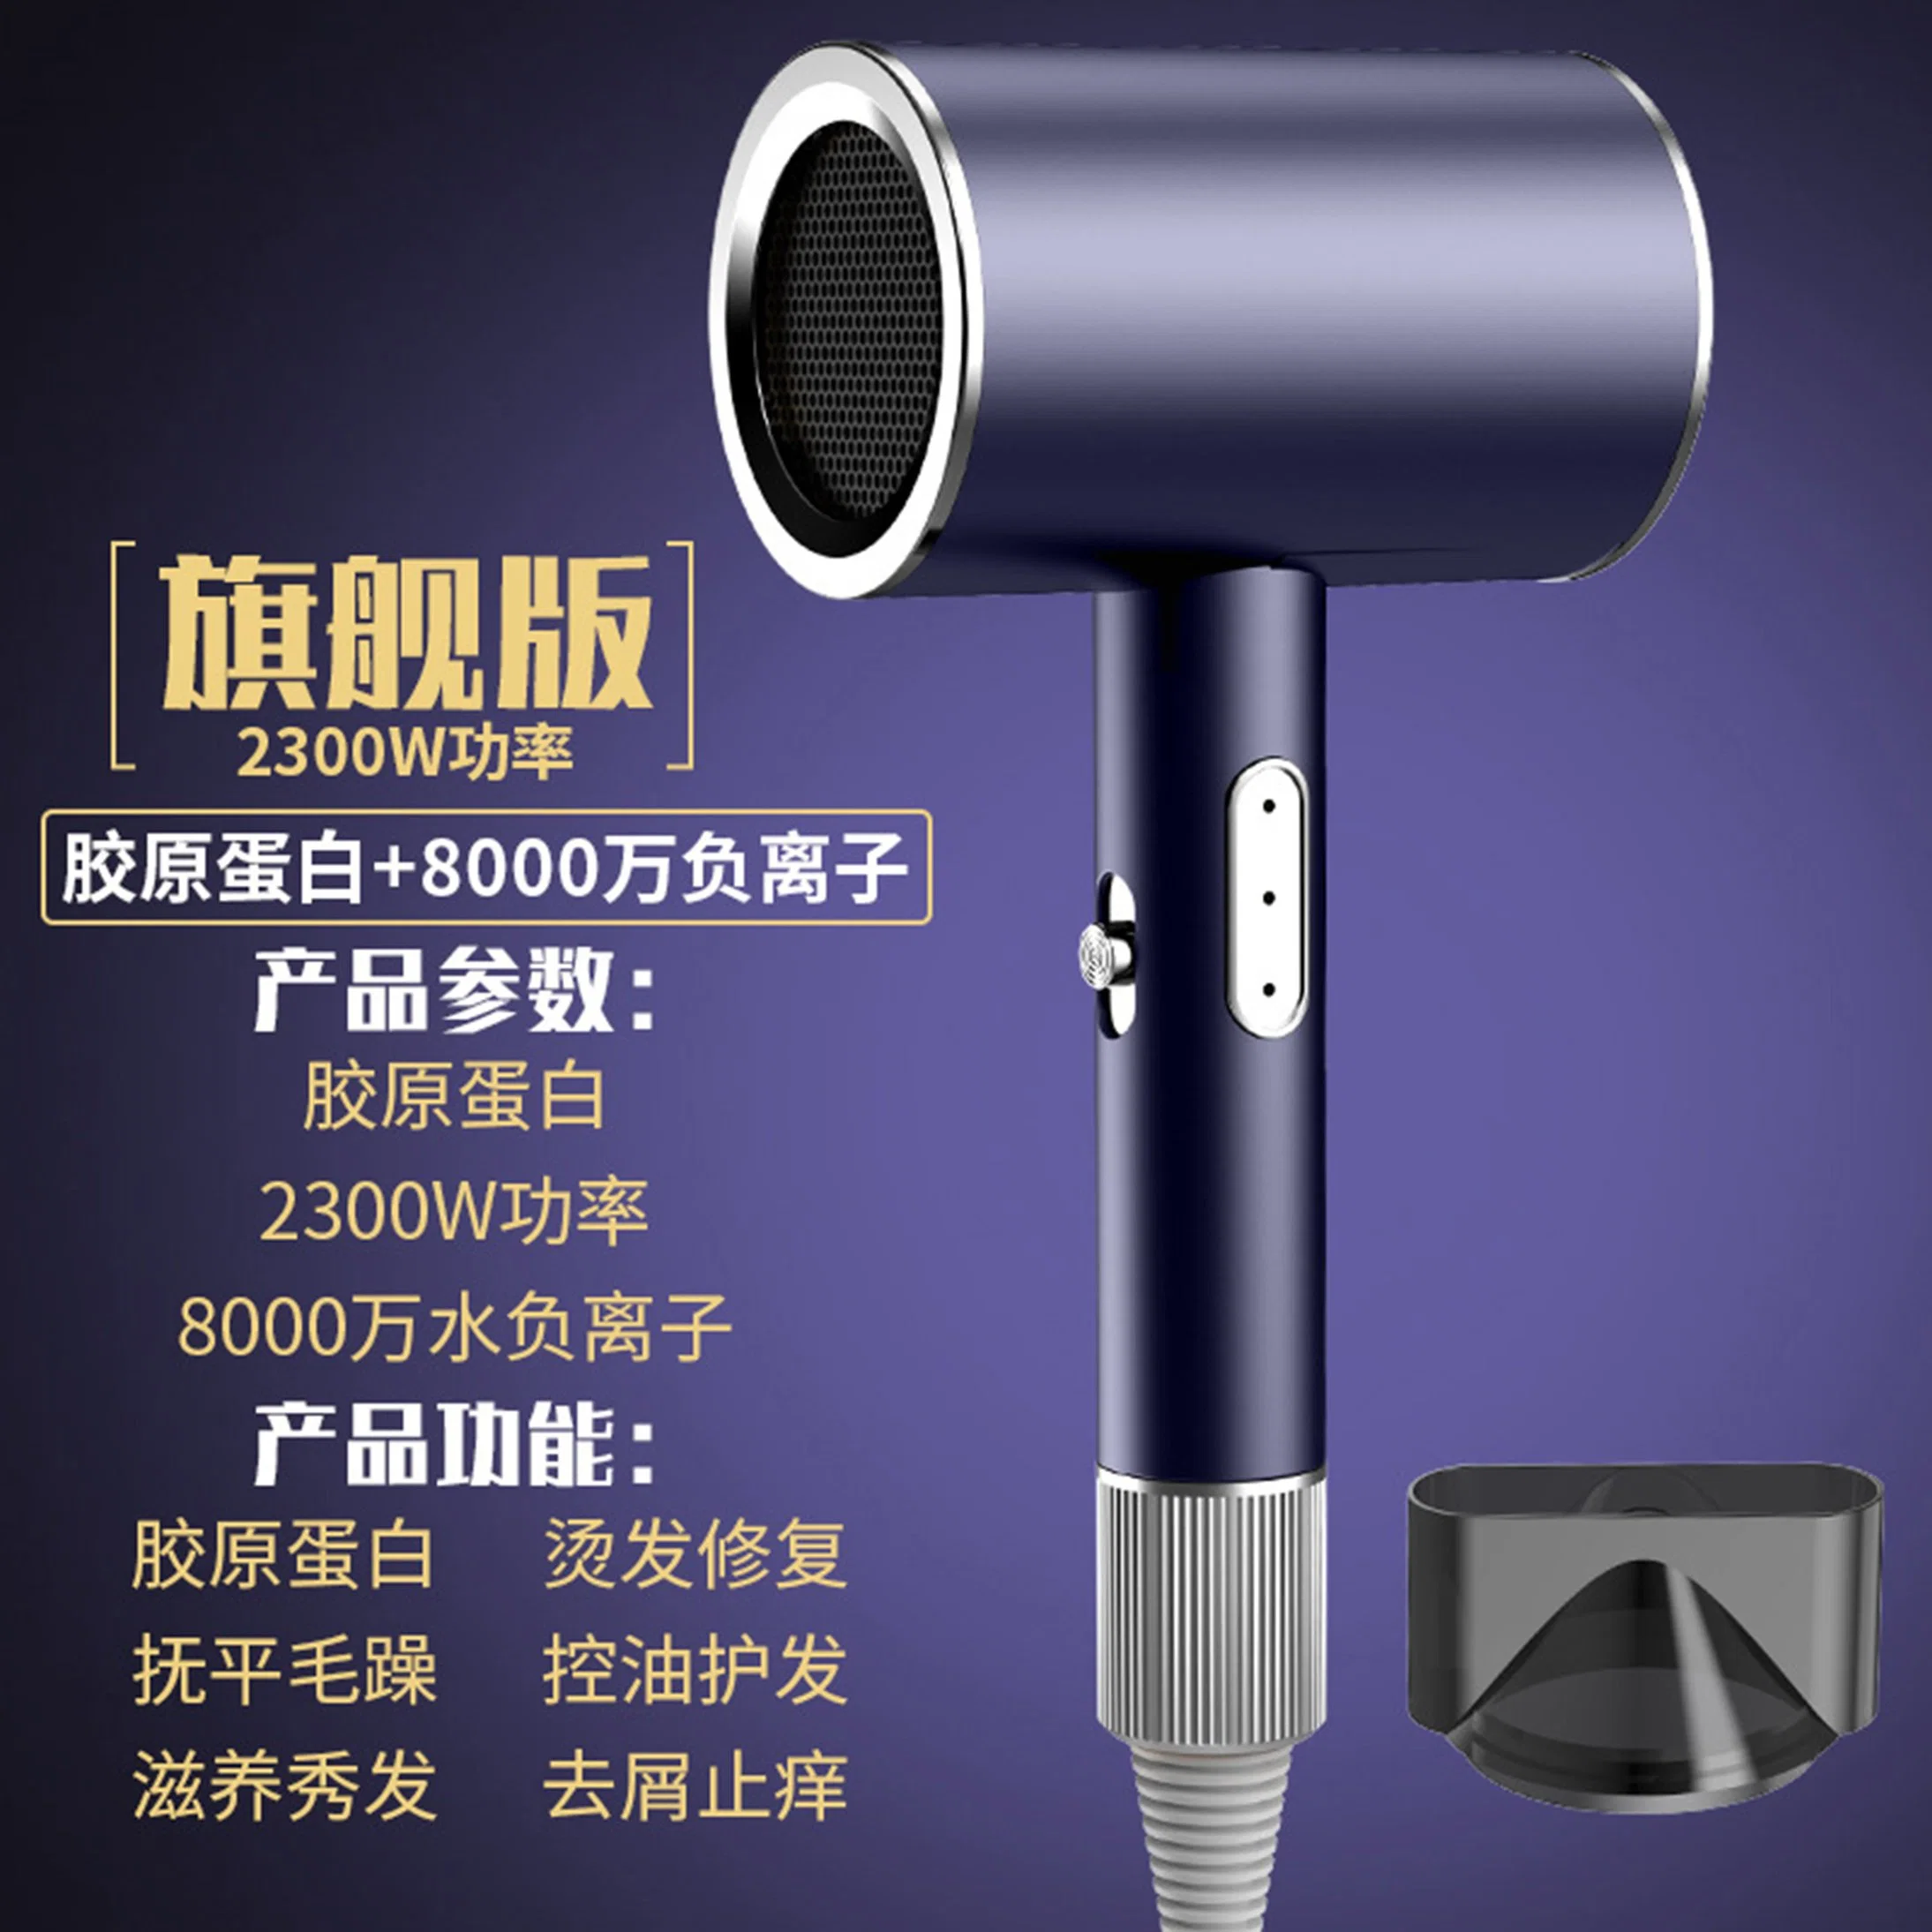 2300W Professional Salon Hair Blow Dryer with 3 Heating Hair Dryer for Home, Travel, Salon Use